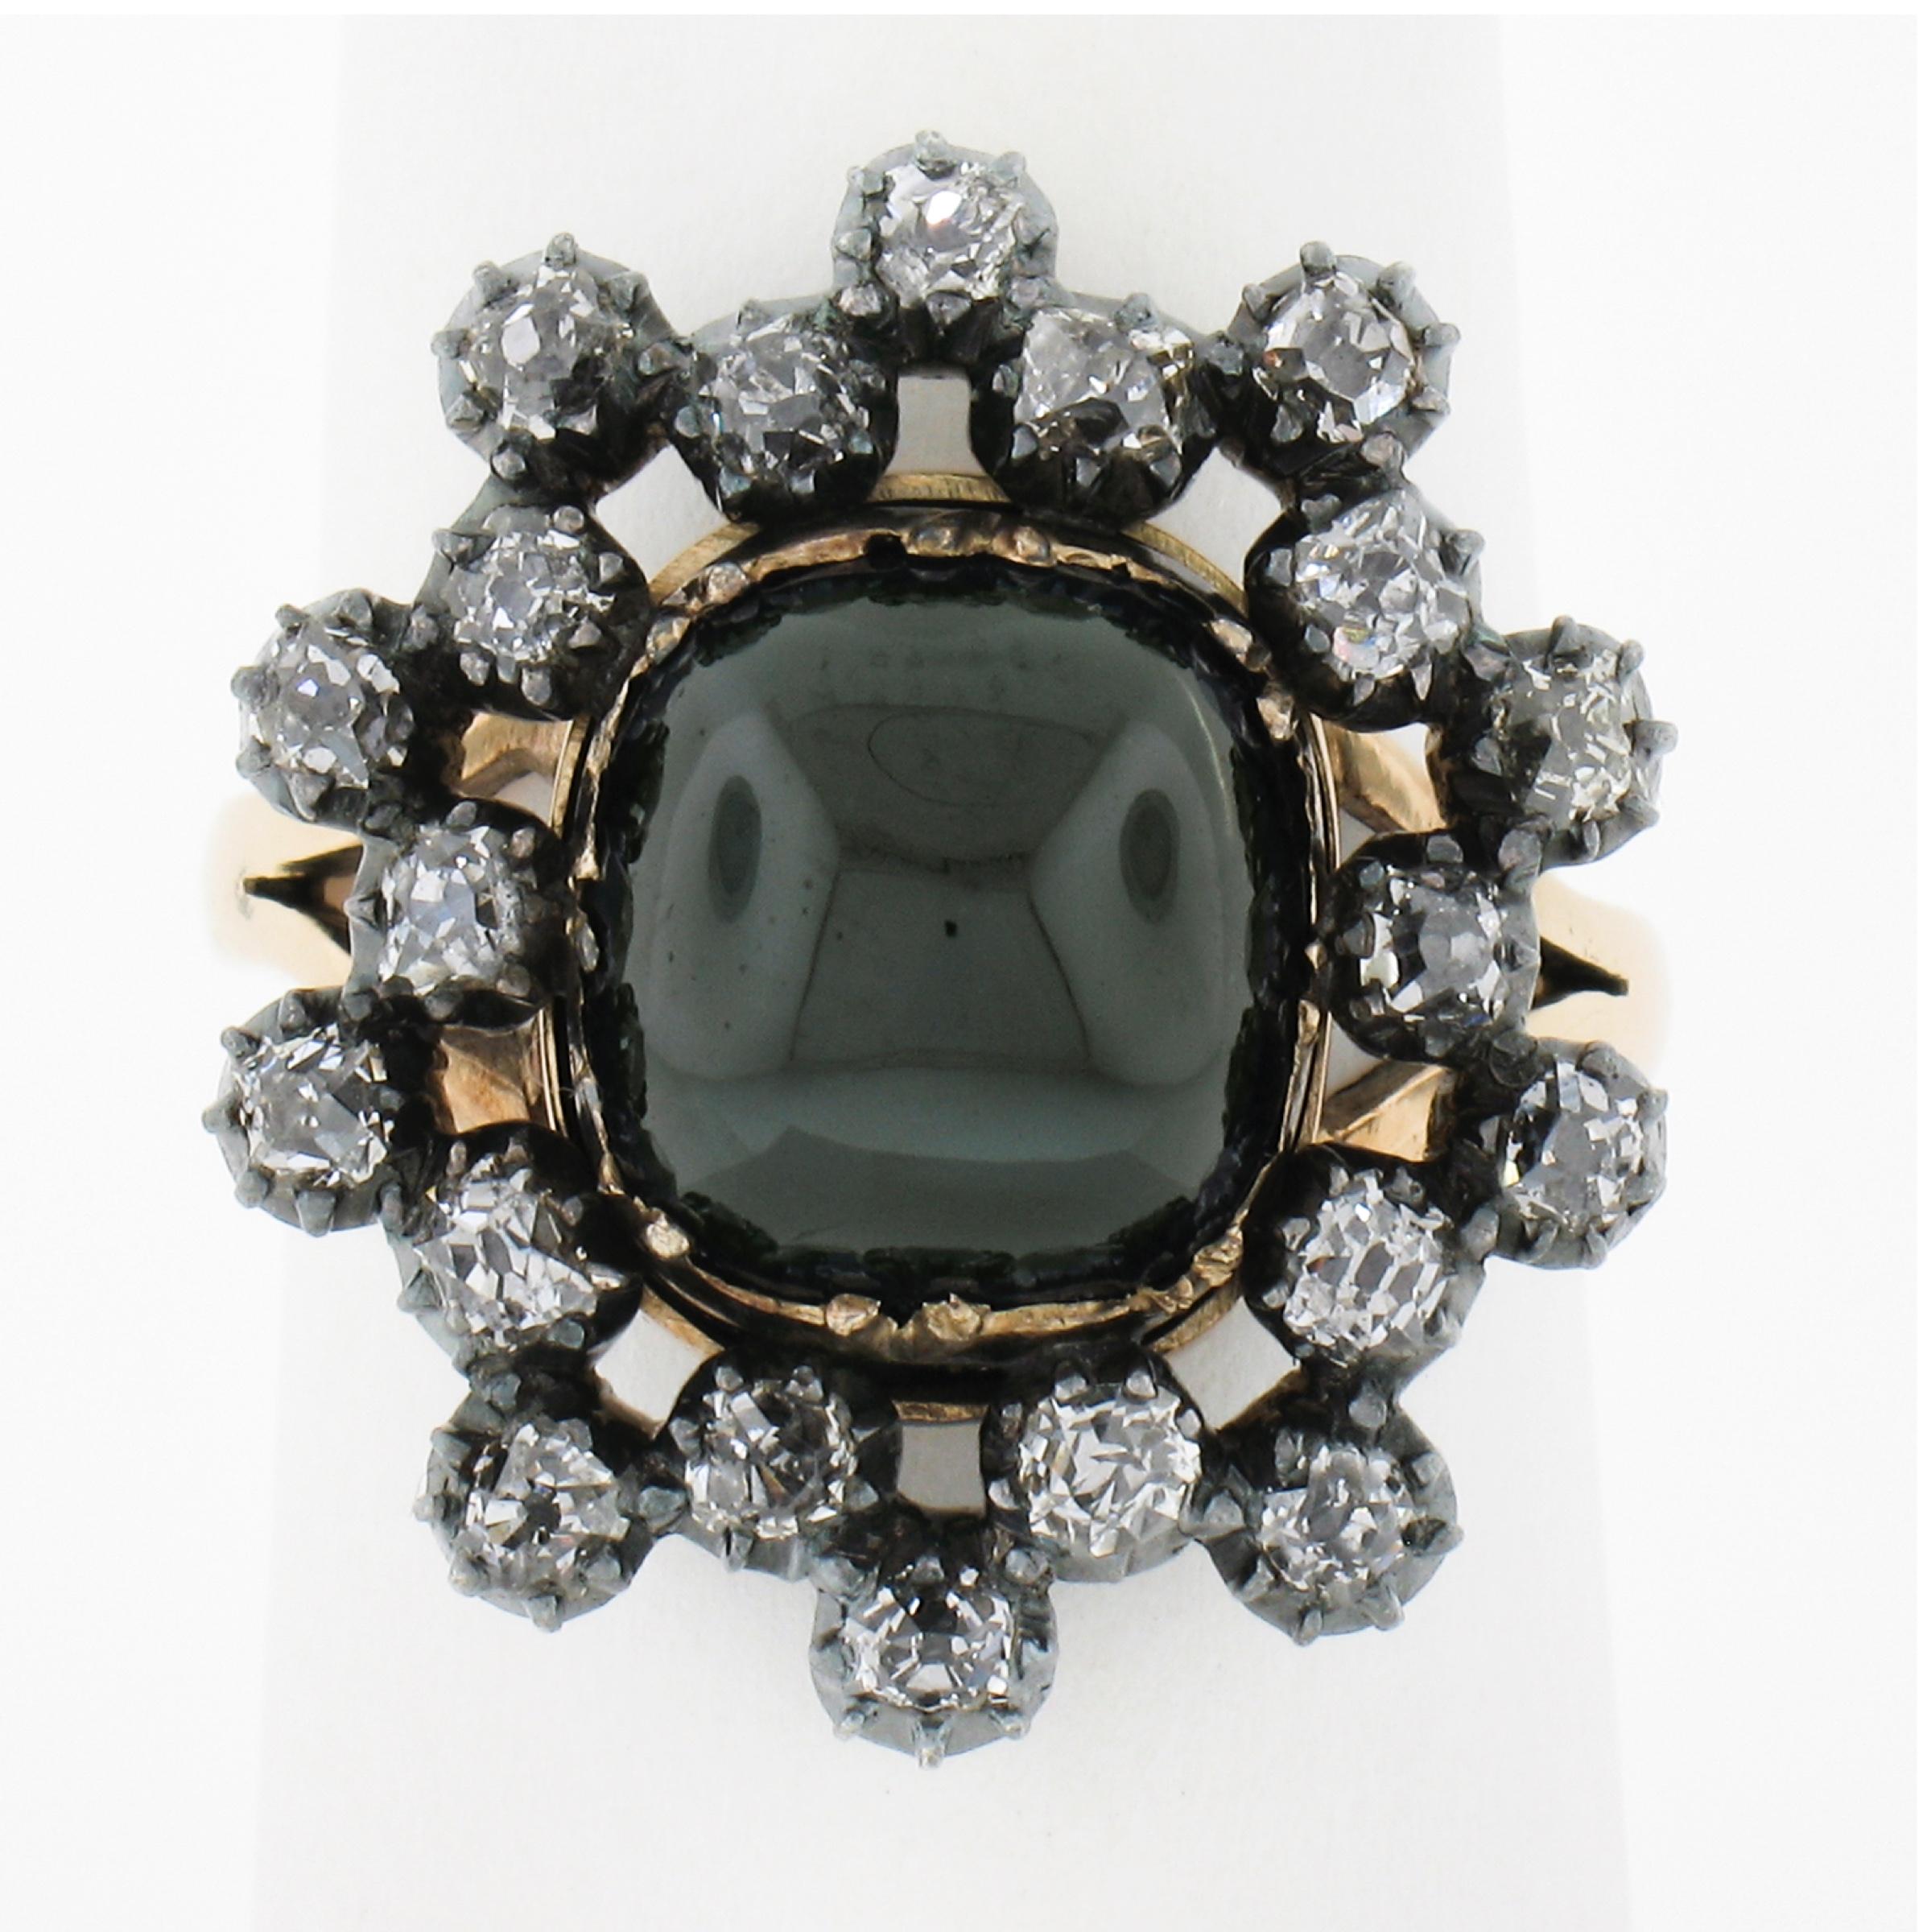 This fabulous antique cocktail ring is crafted in solid yellow gold and silver top. It features a wonderful, GIA certified, natural sapphire that displays dark greenish blue color, surrounded by old mine and Peruzzi cut diamonds that add a glamorous